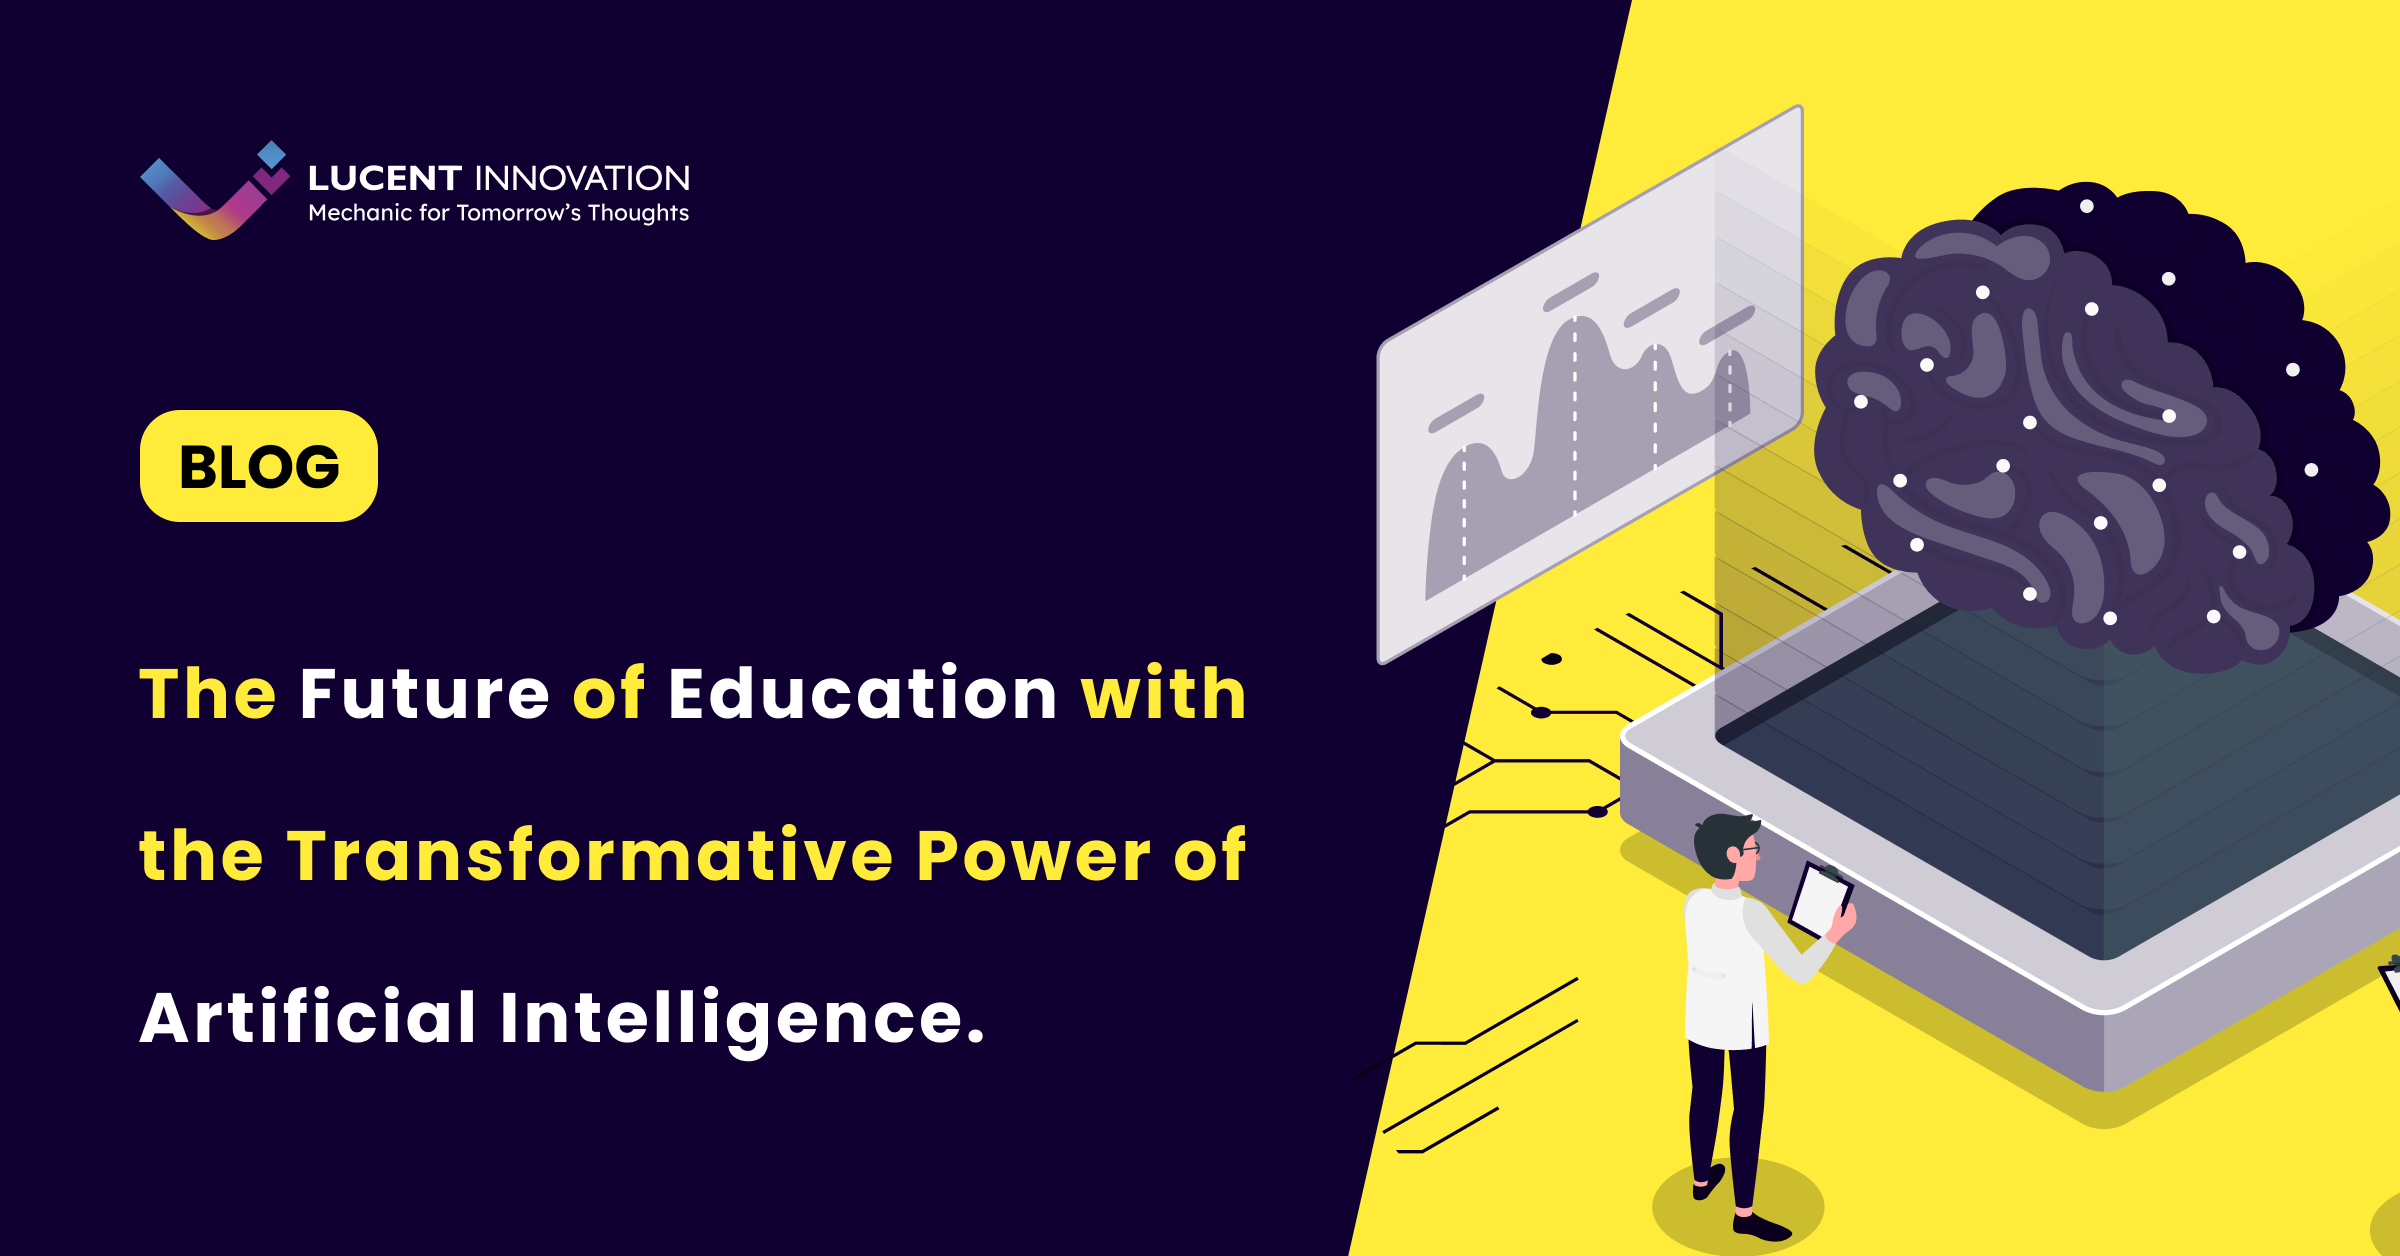 The Future of Education with the Transformative Power of Artificial Intelligence